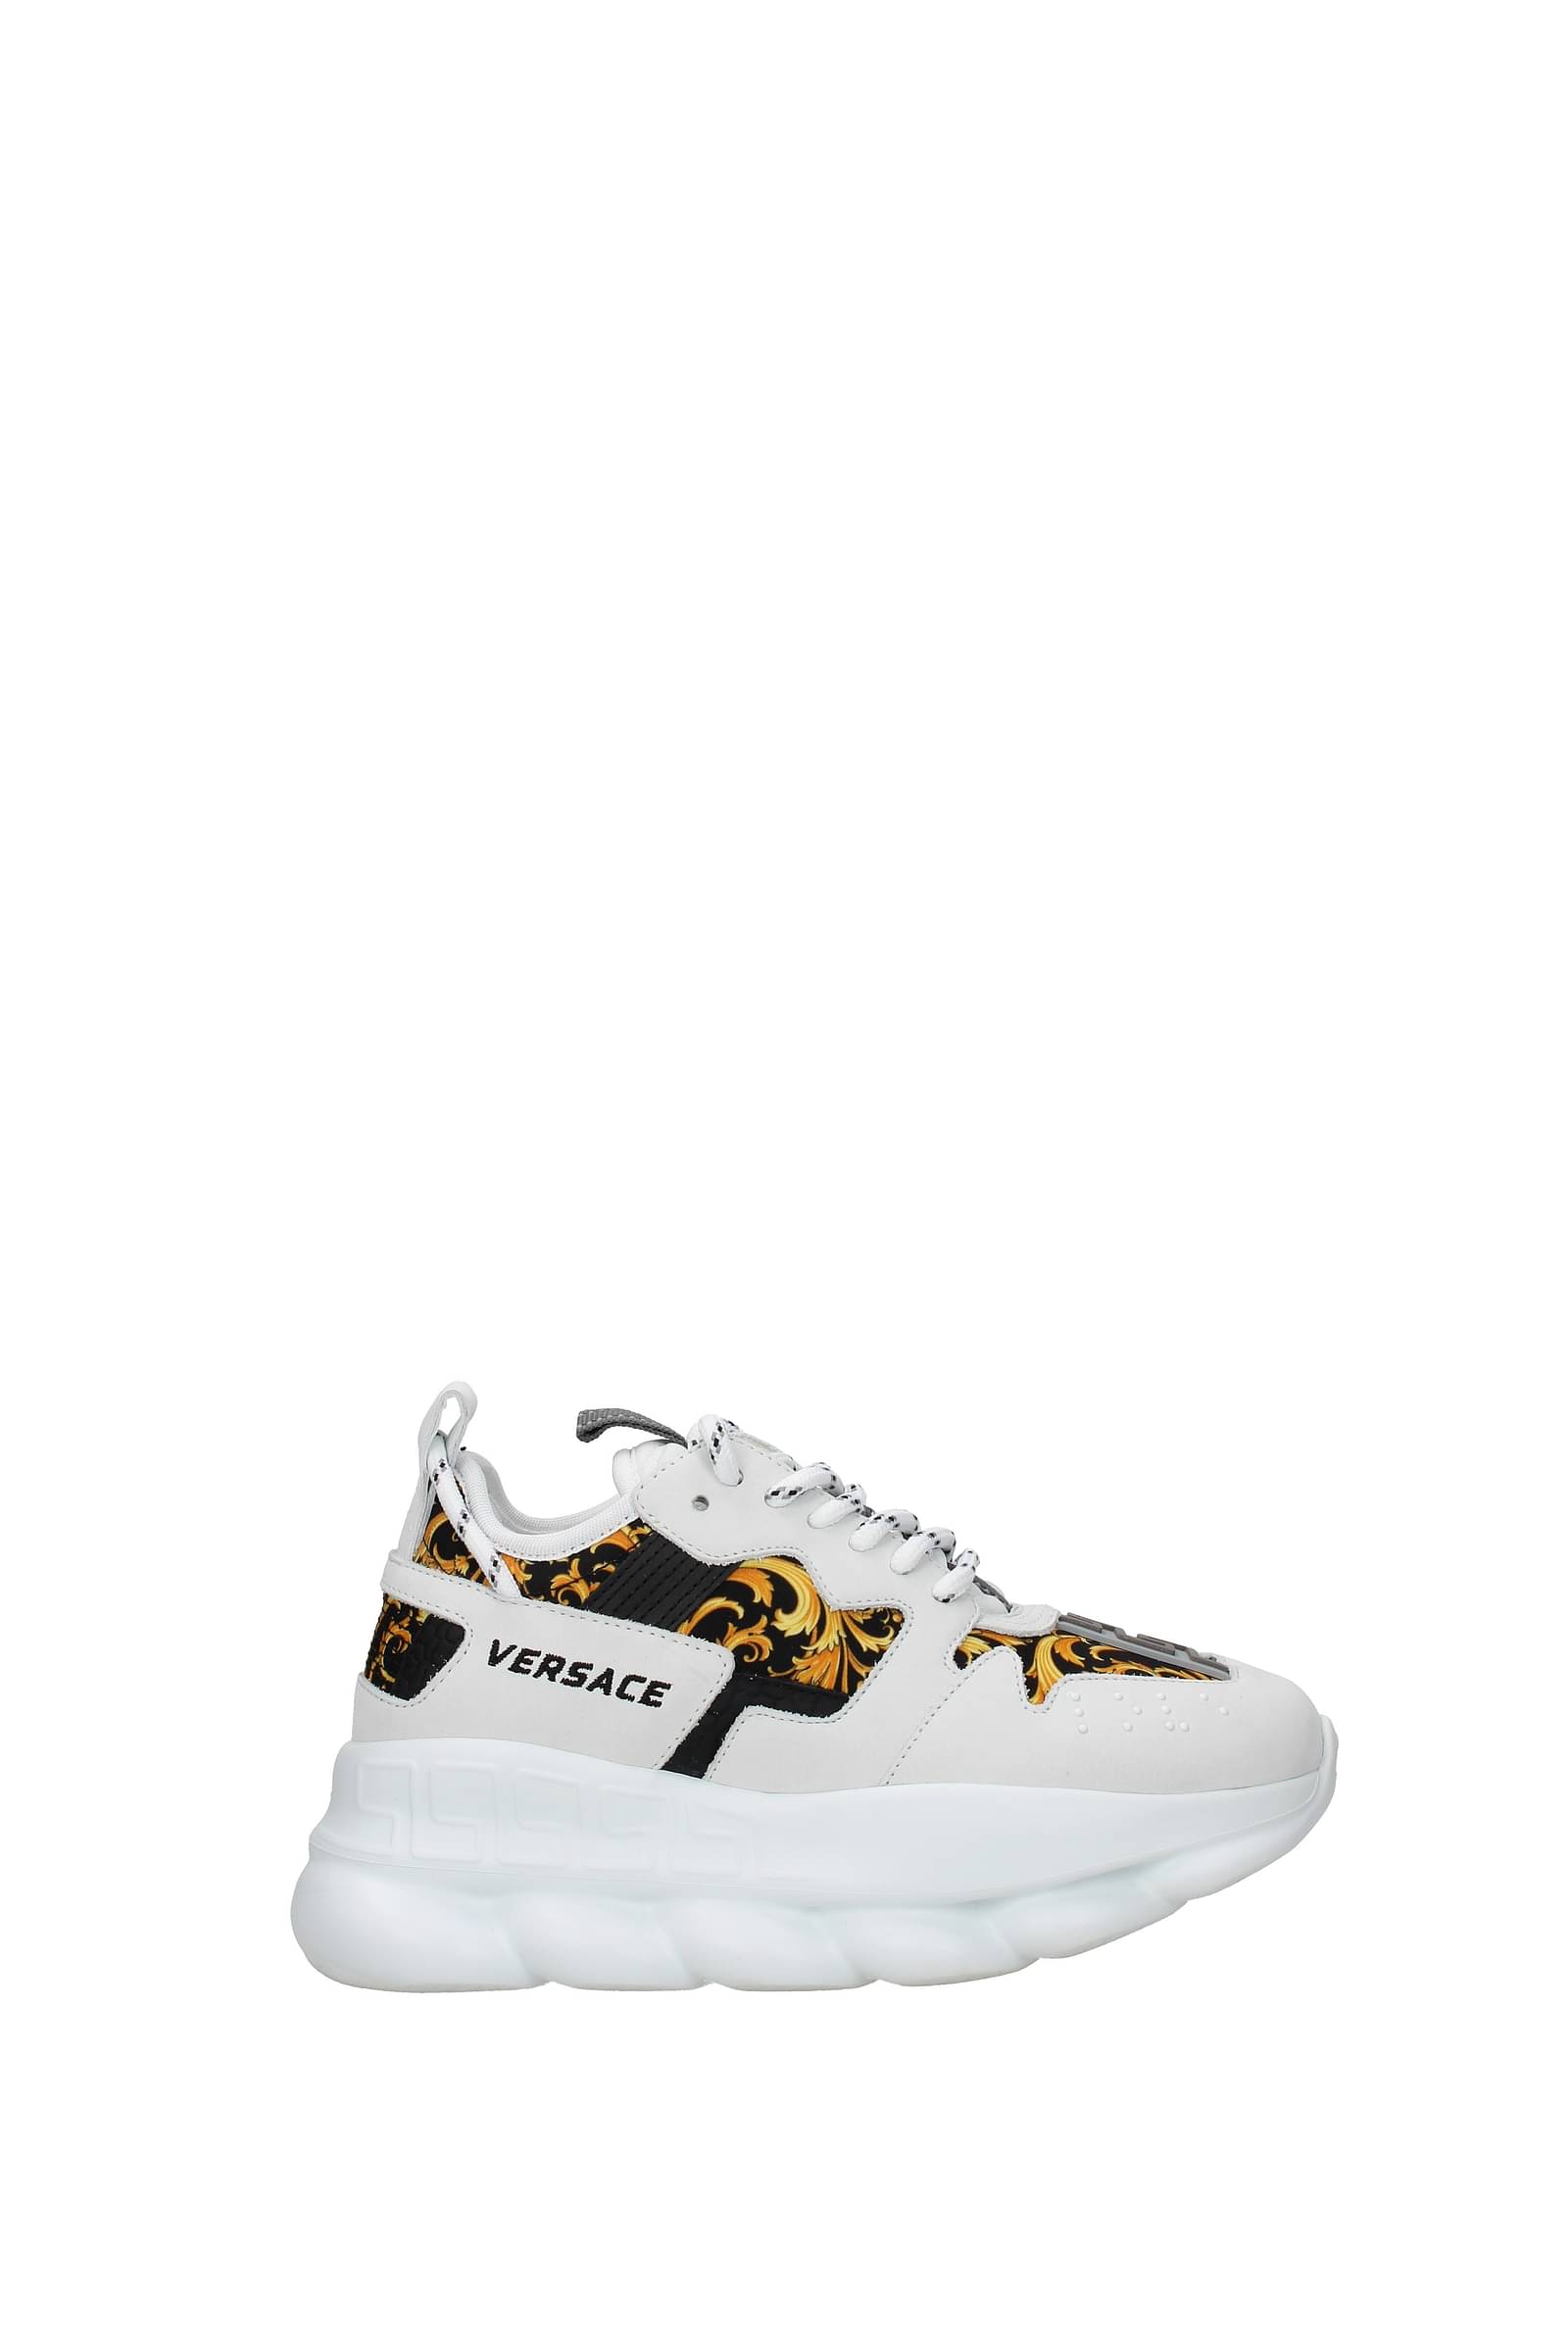 versace shoes outlet